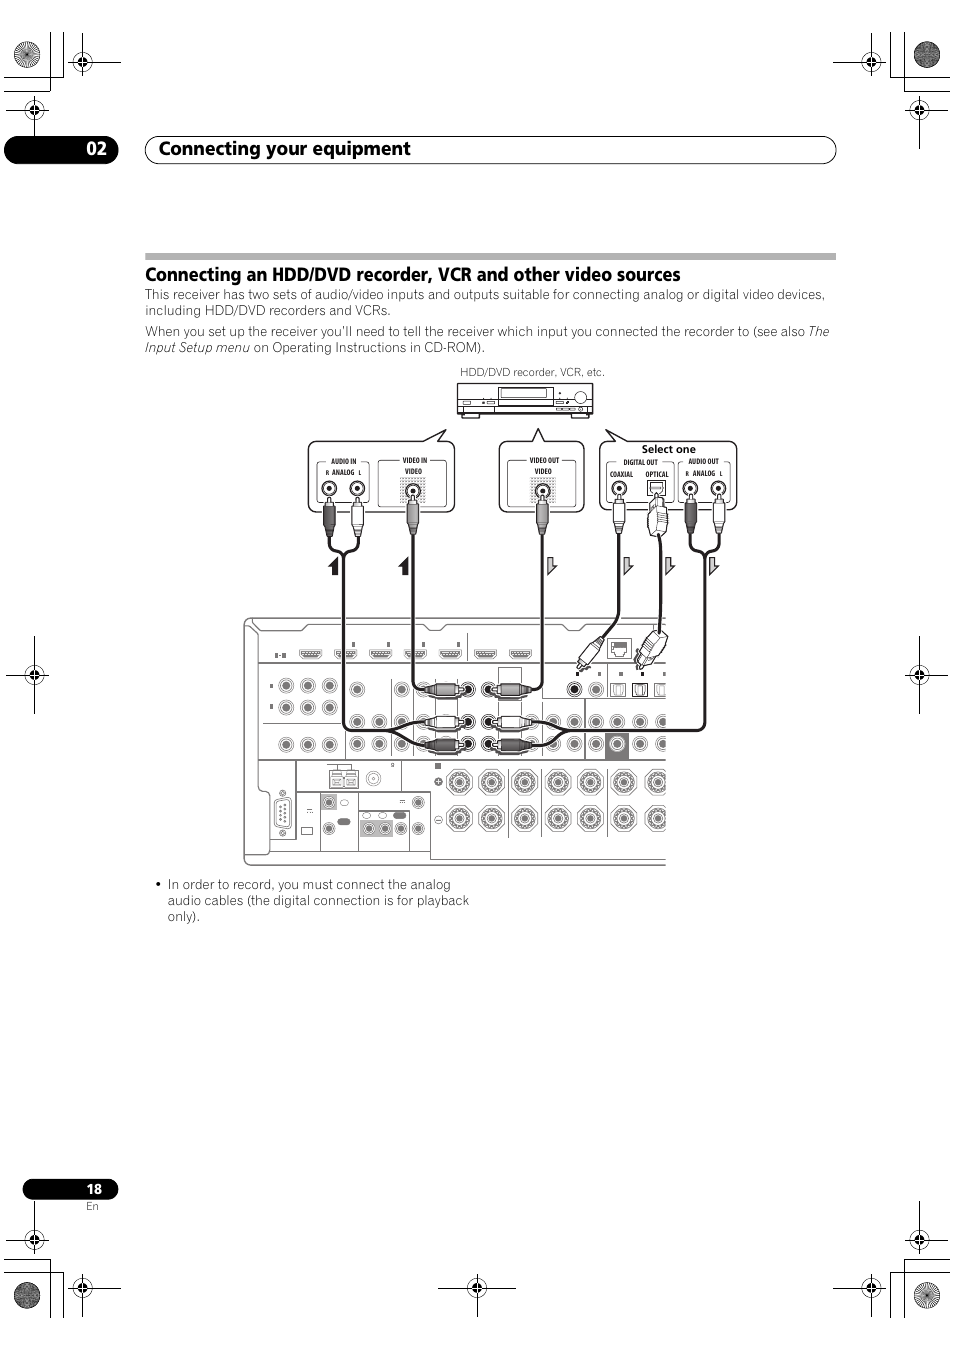 Connecting your equipment 02 | Pioneer VSX-2020-K User Manual | Page 18 /  88 | Original mode